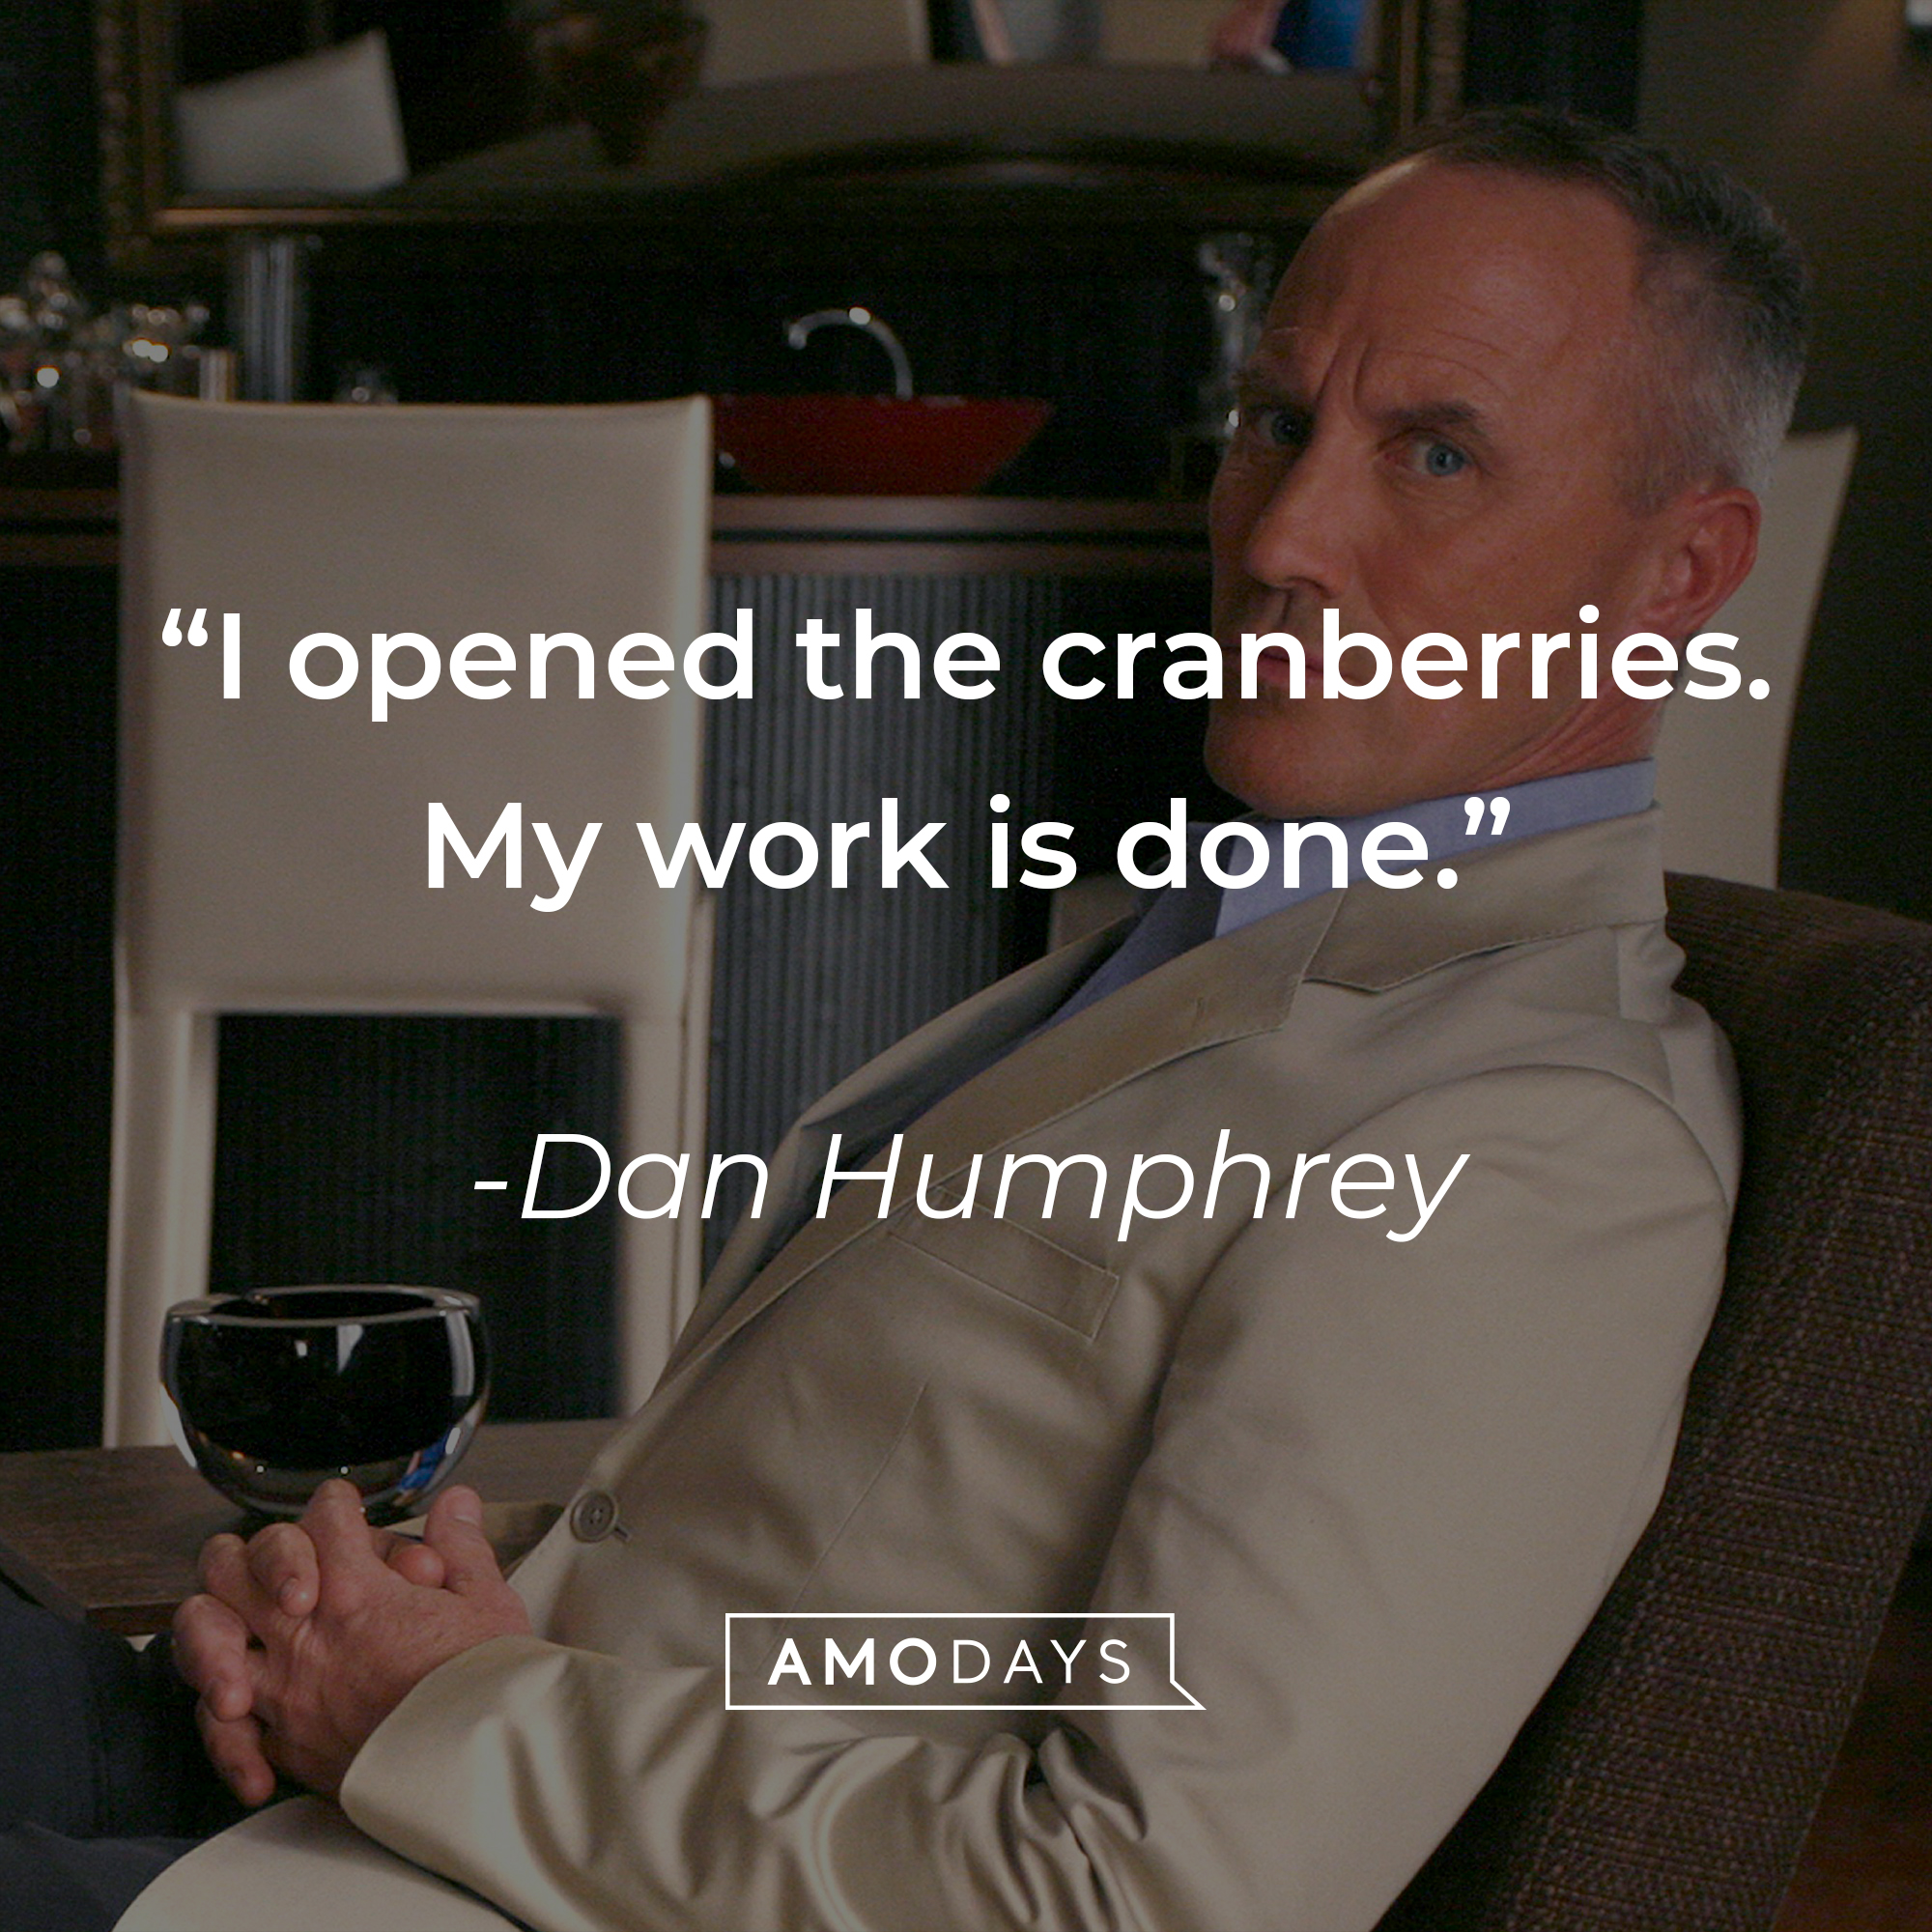 Image from "Gossip Girl" with Dan Humphrey's quote: "I opened the cranberries. My work is done." | Source: facebook.com/GossipGirl